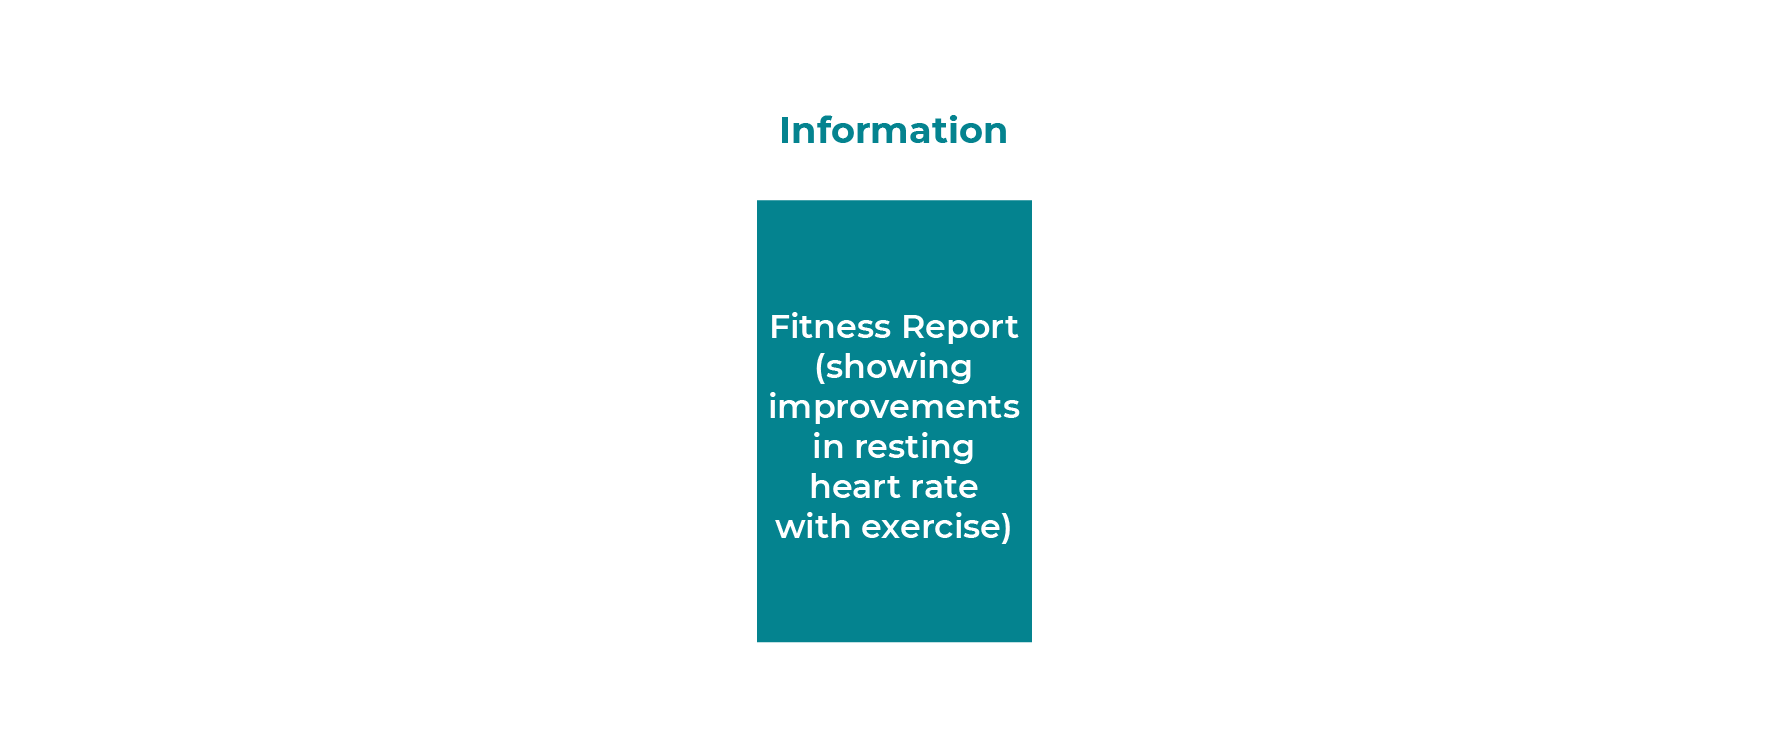 A picture shows the information rectangle that says “fitness report” (showing improvements in resting heart rate with exercise).